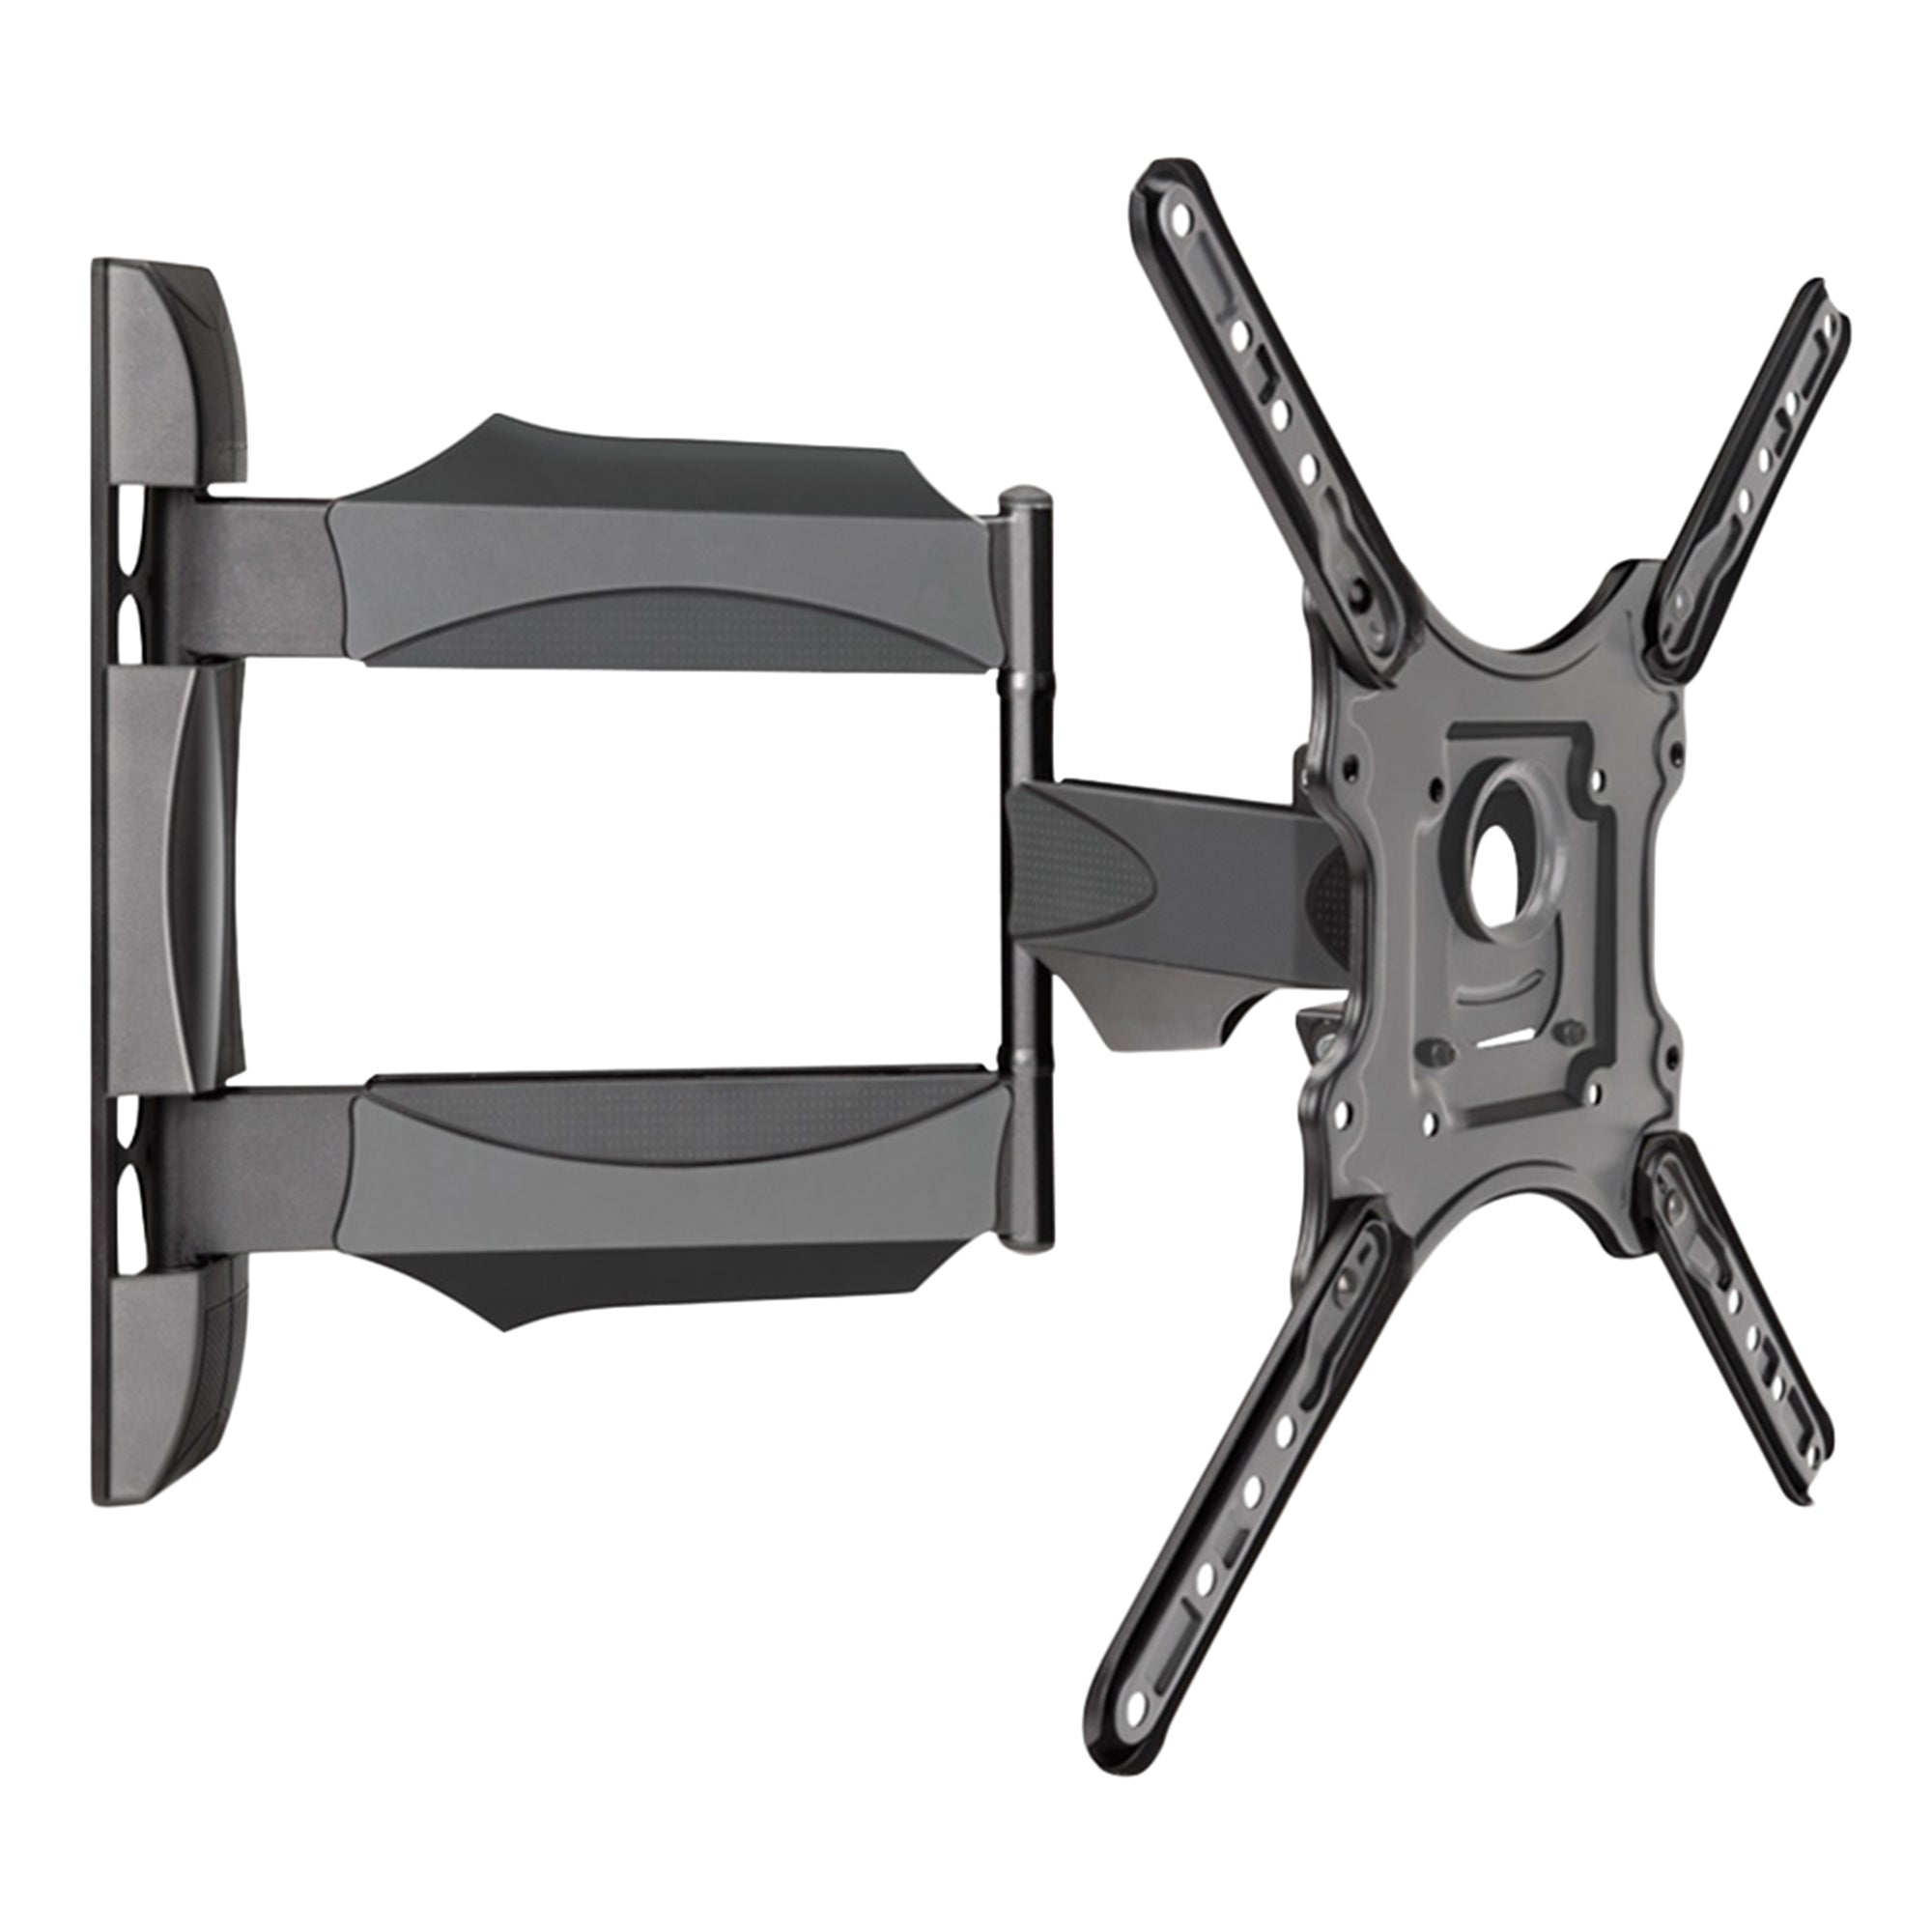 Gadgets+ full motion TV mount makes it easy to wall mount your TV! This TV mounting brackets fits 32&quot; - 55&quot; TVs.